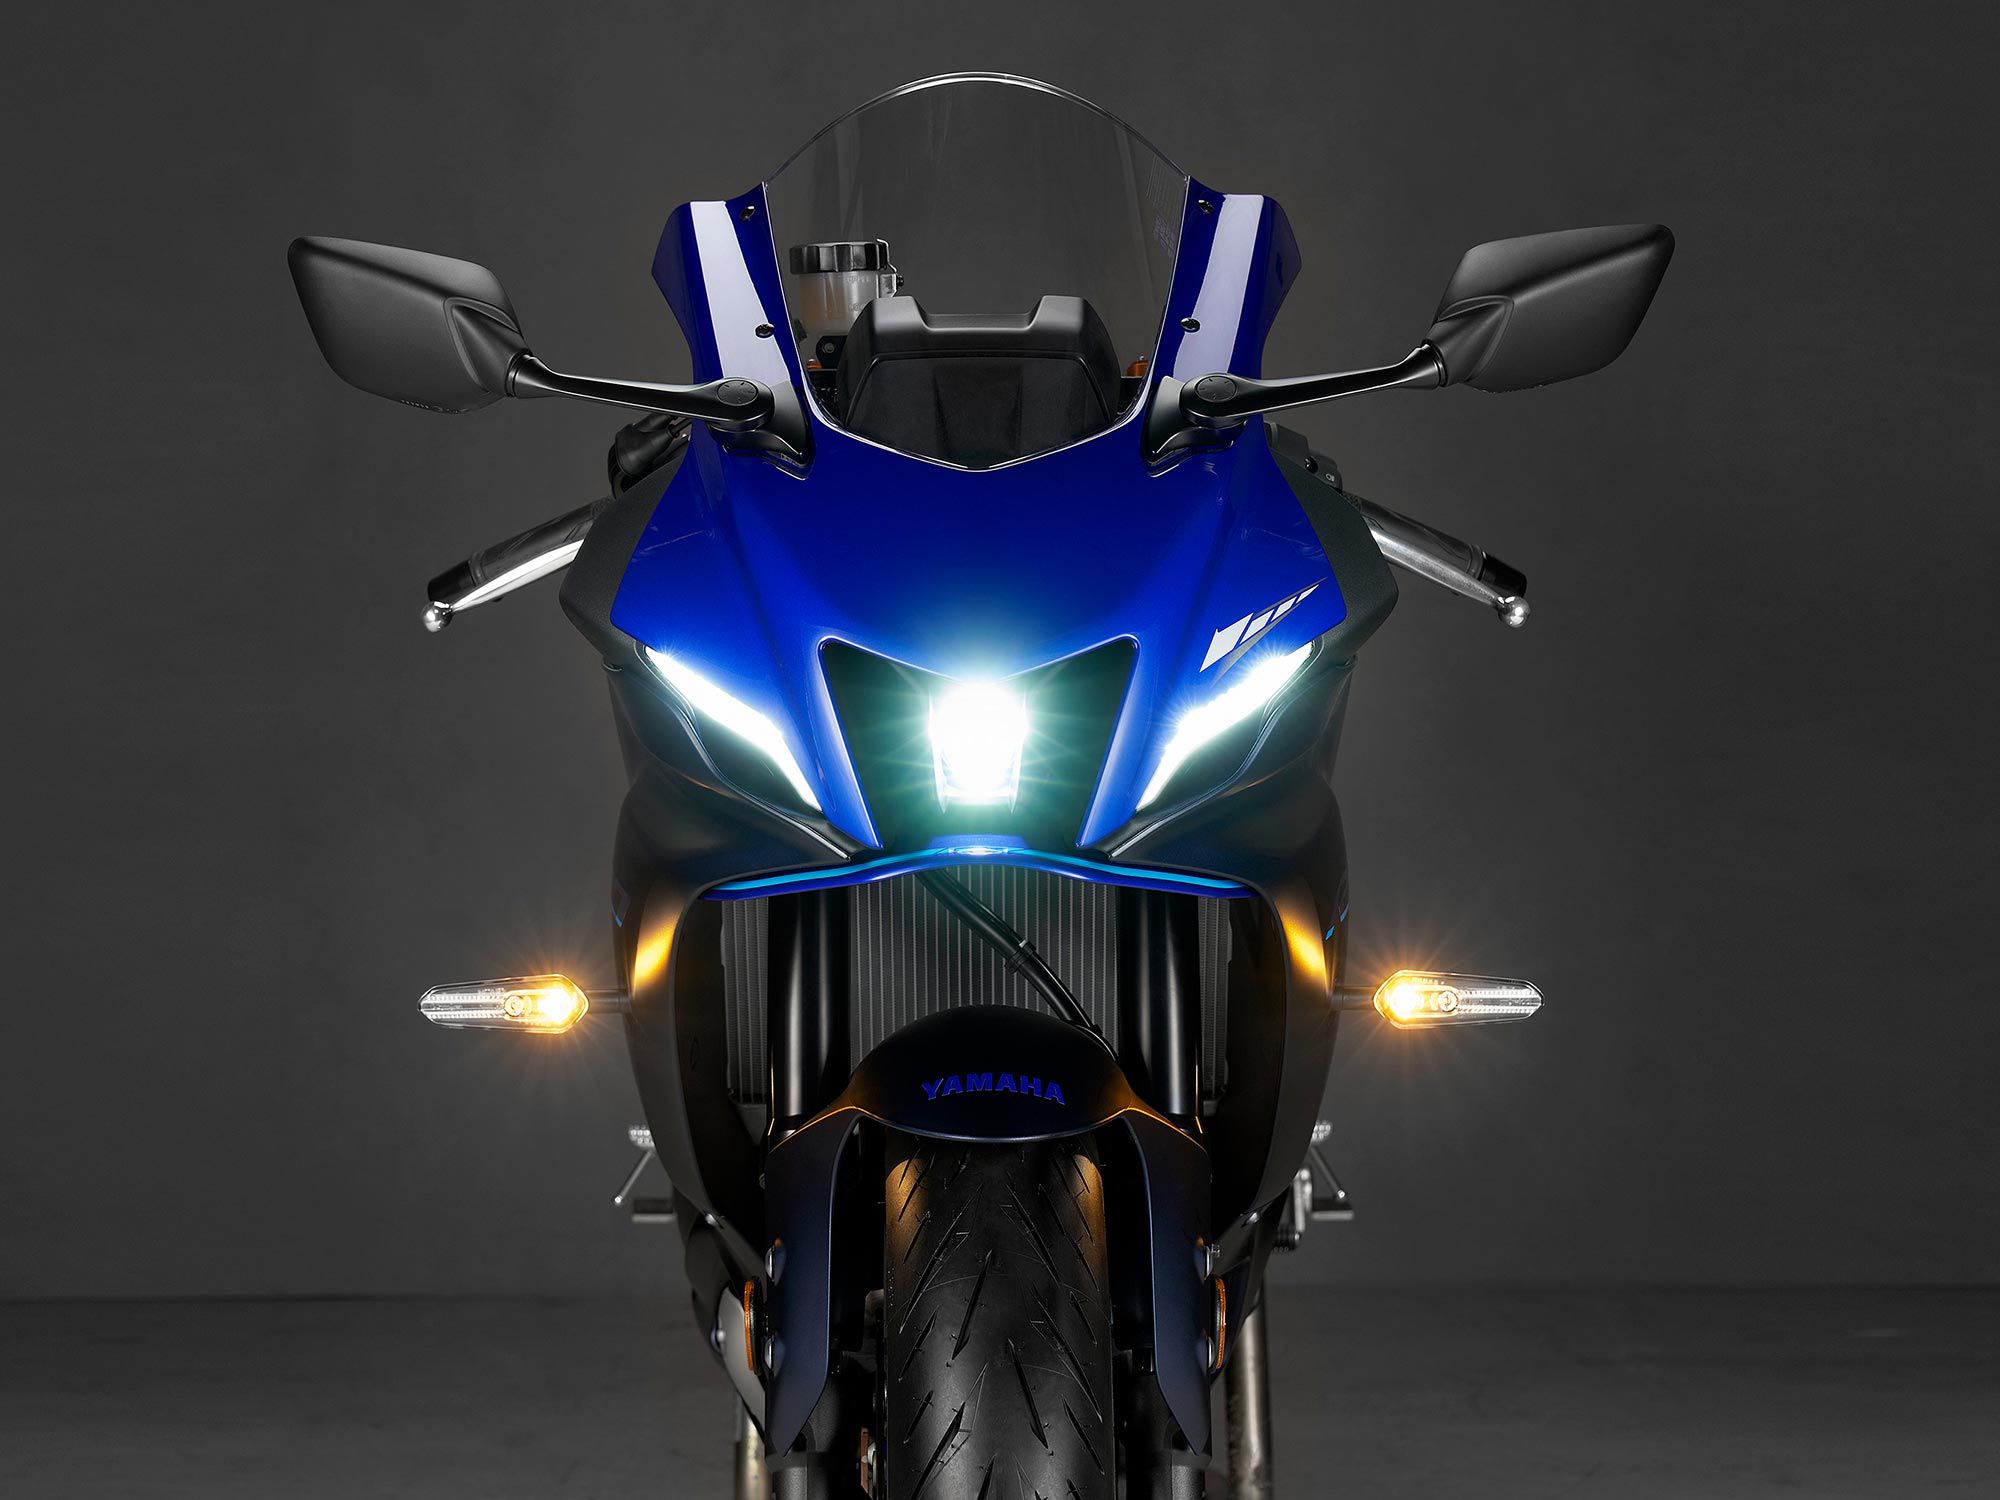 The R7 benefits from Yamaha’s R-bike family styling inspired by the YZR-M1 MotoGP machine.